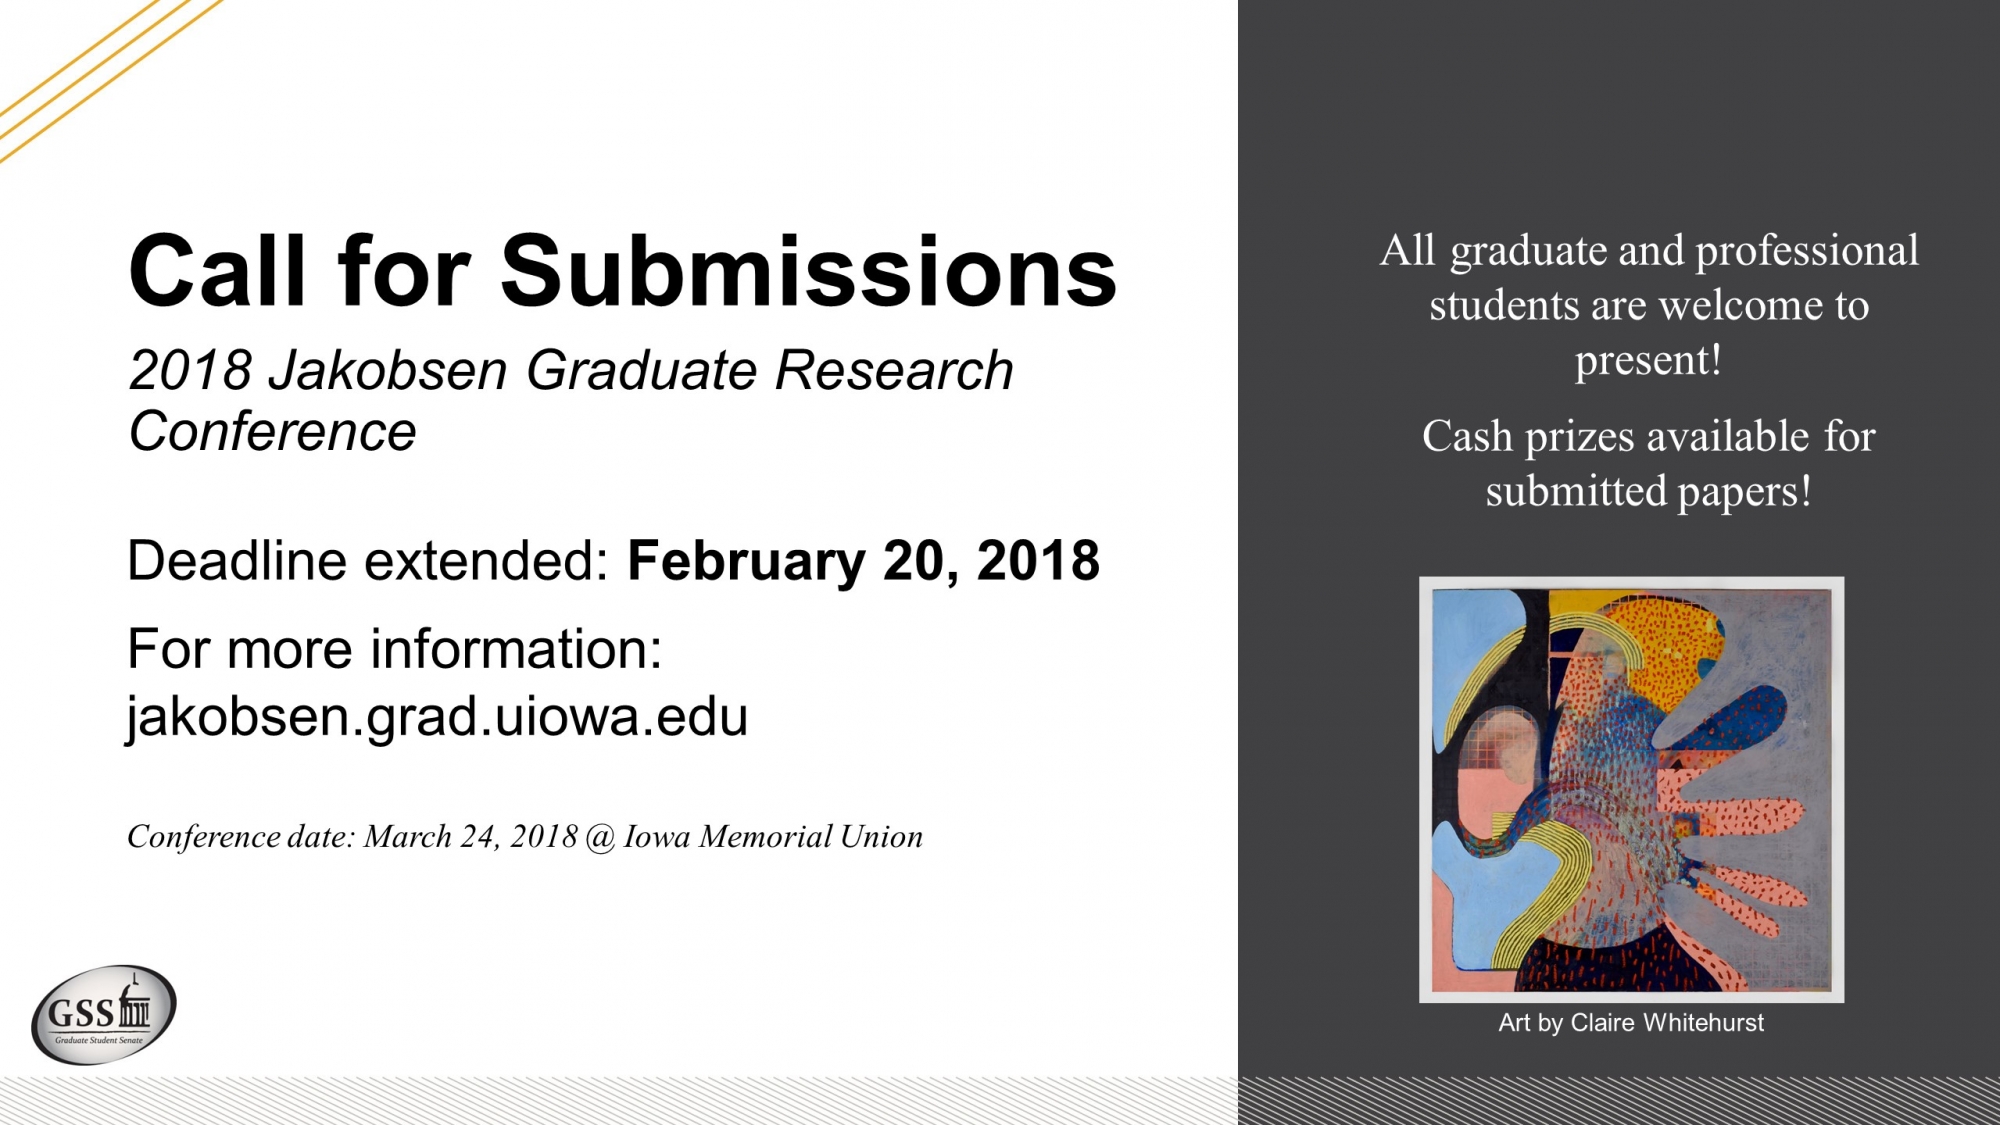 Call for Submissions. 2018 Jakobsen Graudate Research Conference. Deadline extended: February 20, 2018. For more information: jakobsen.grad.uiowa.edu. Conference date: March 24, 2018 @ Iowa Memorial Union. All graduate and professional students are welcome to present! Csh prizes available for submitted papers.